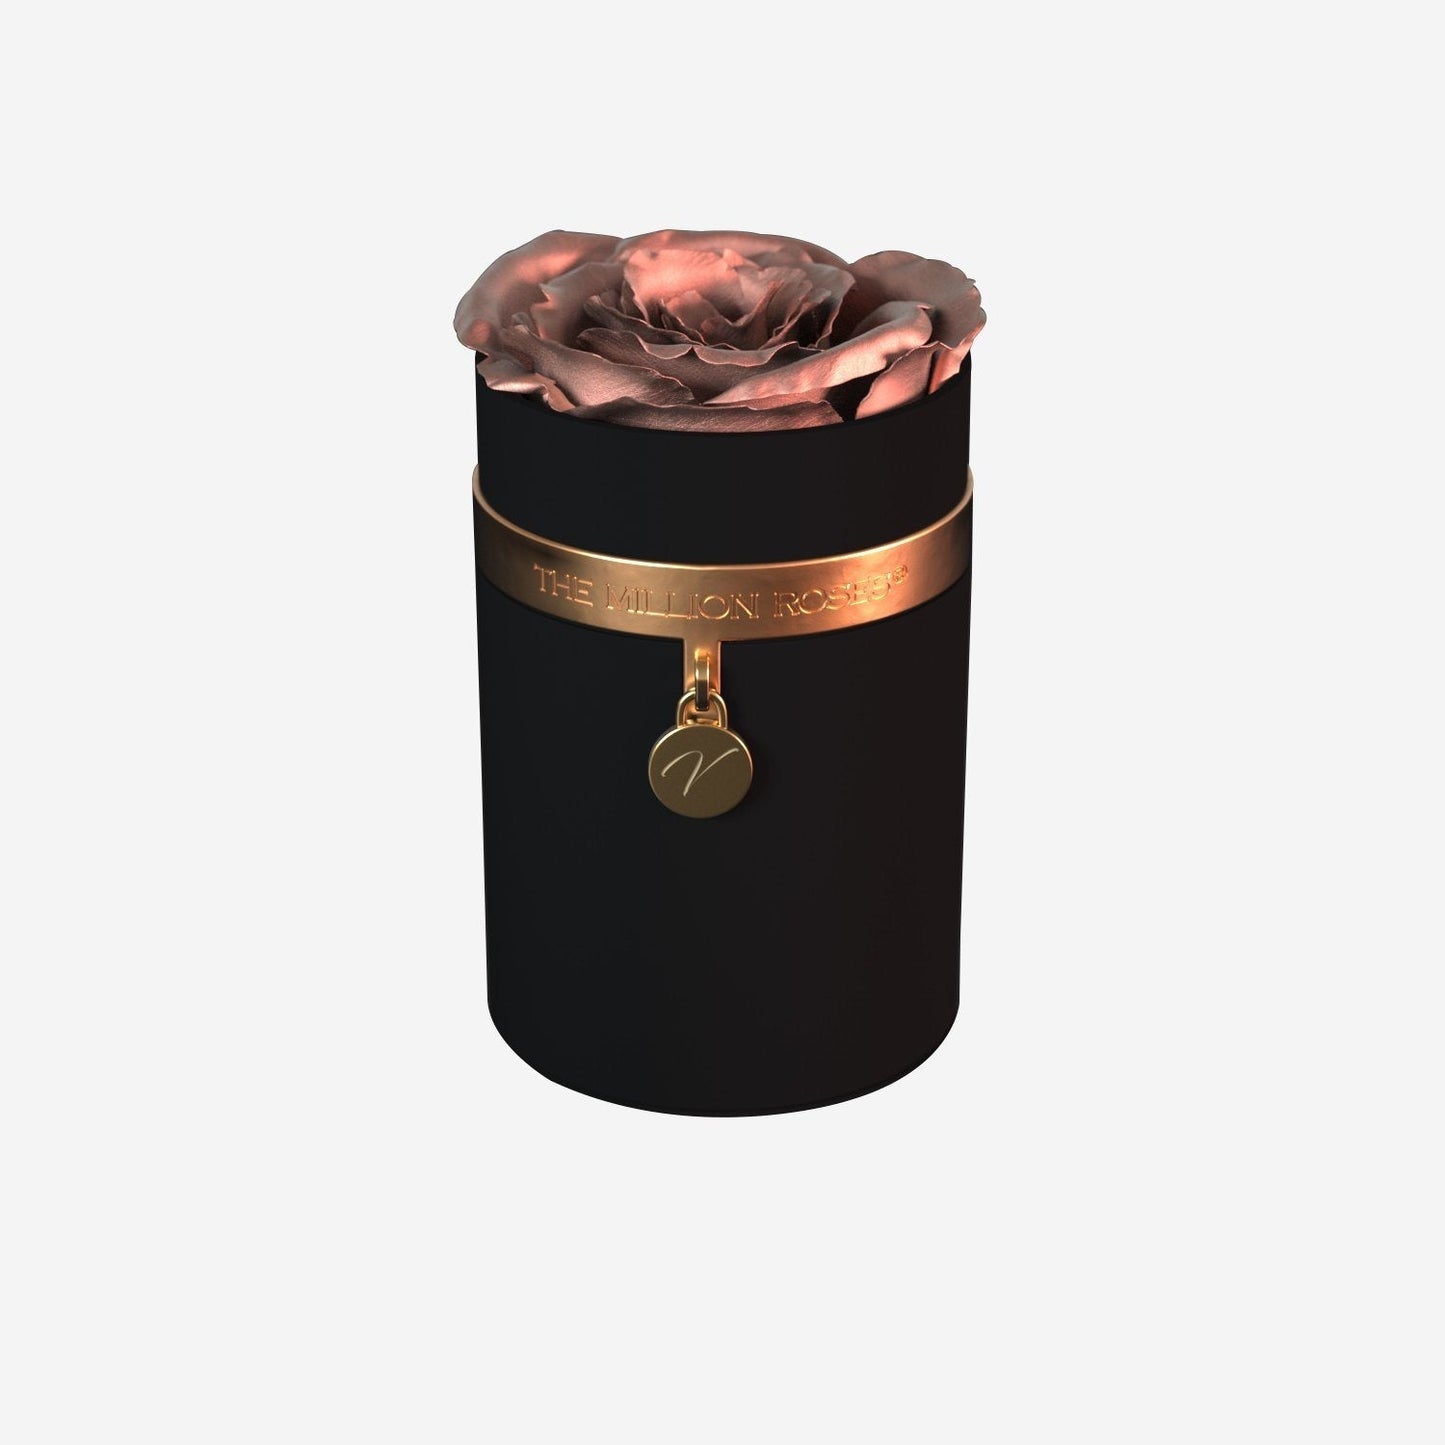 One in a Million™ Round Black Box | Charm Edition | Rose Gold Rose - The Million Roses